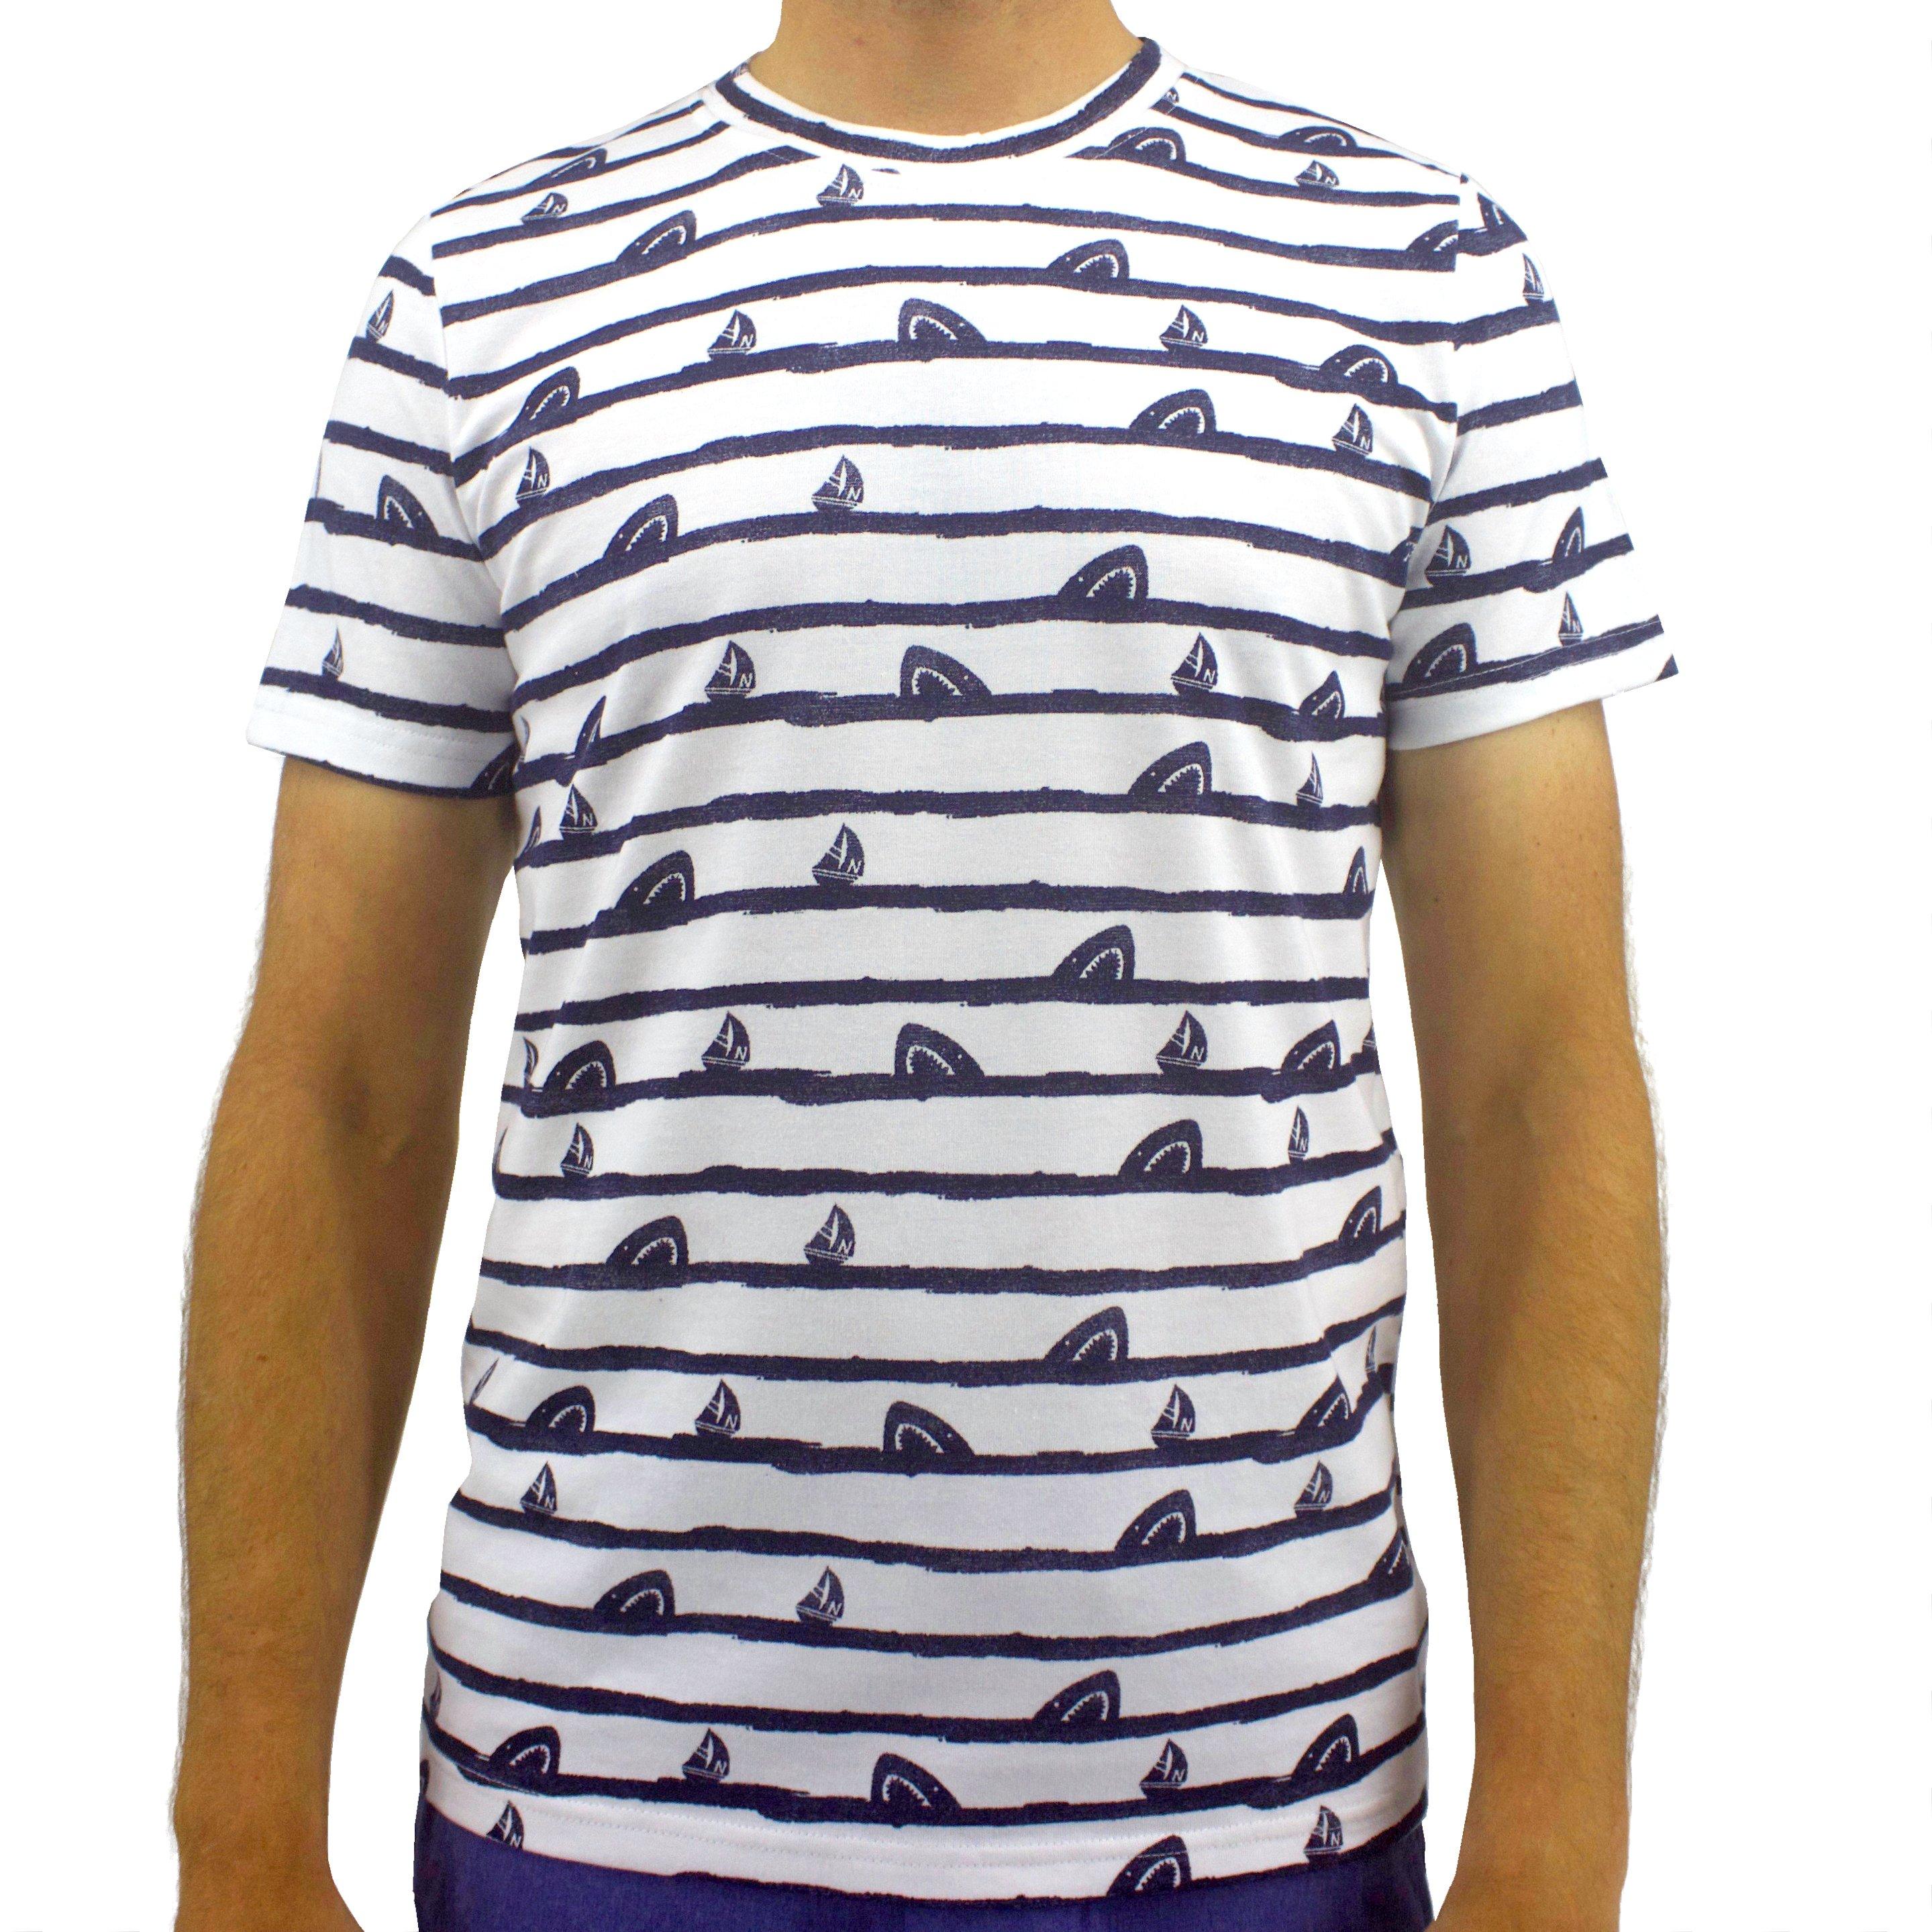 Rock Atoll Shark and Sailboat Waves Striped Graphic Tee in White